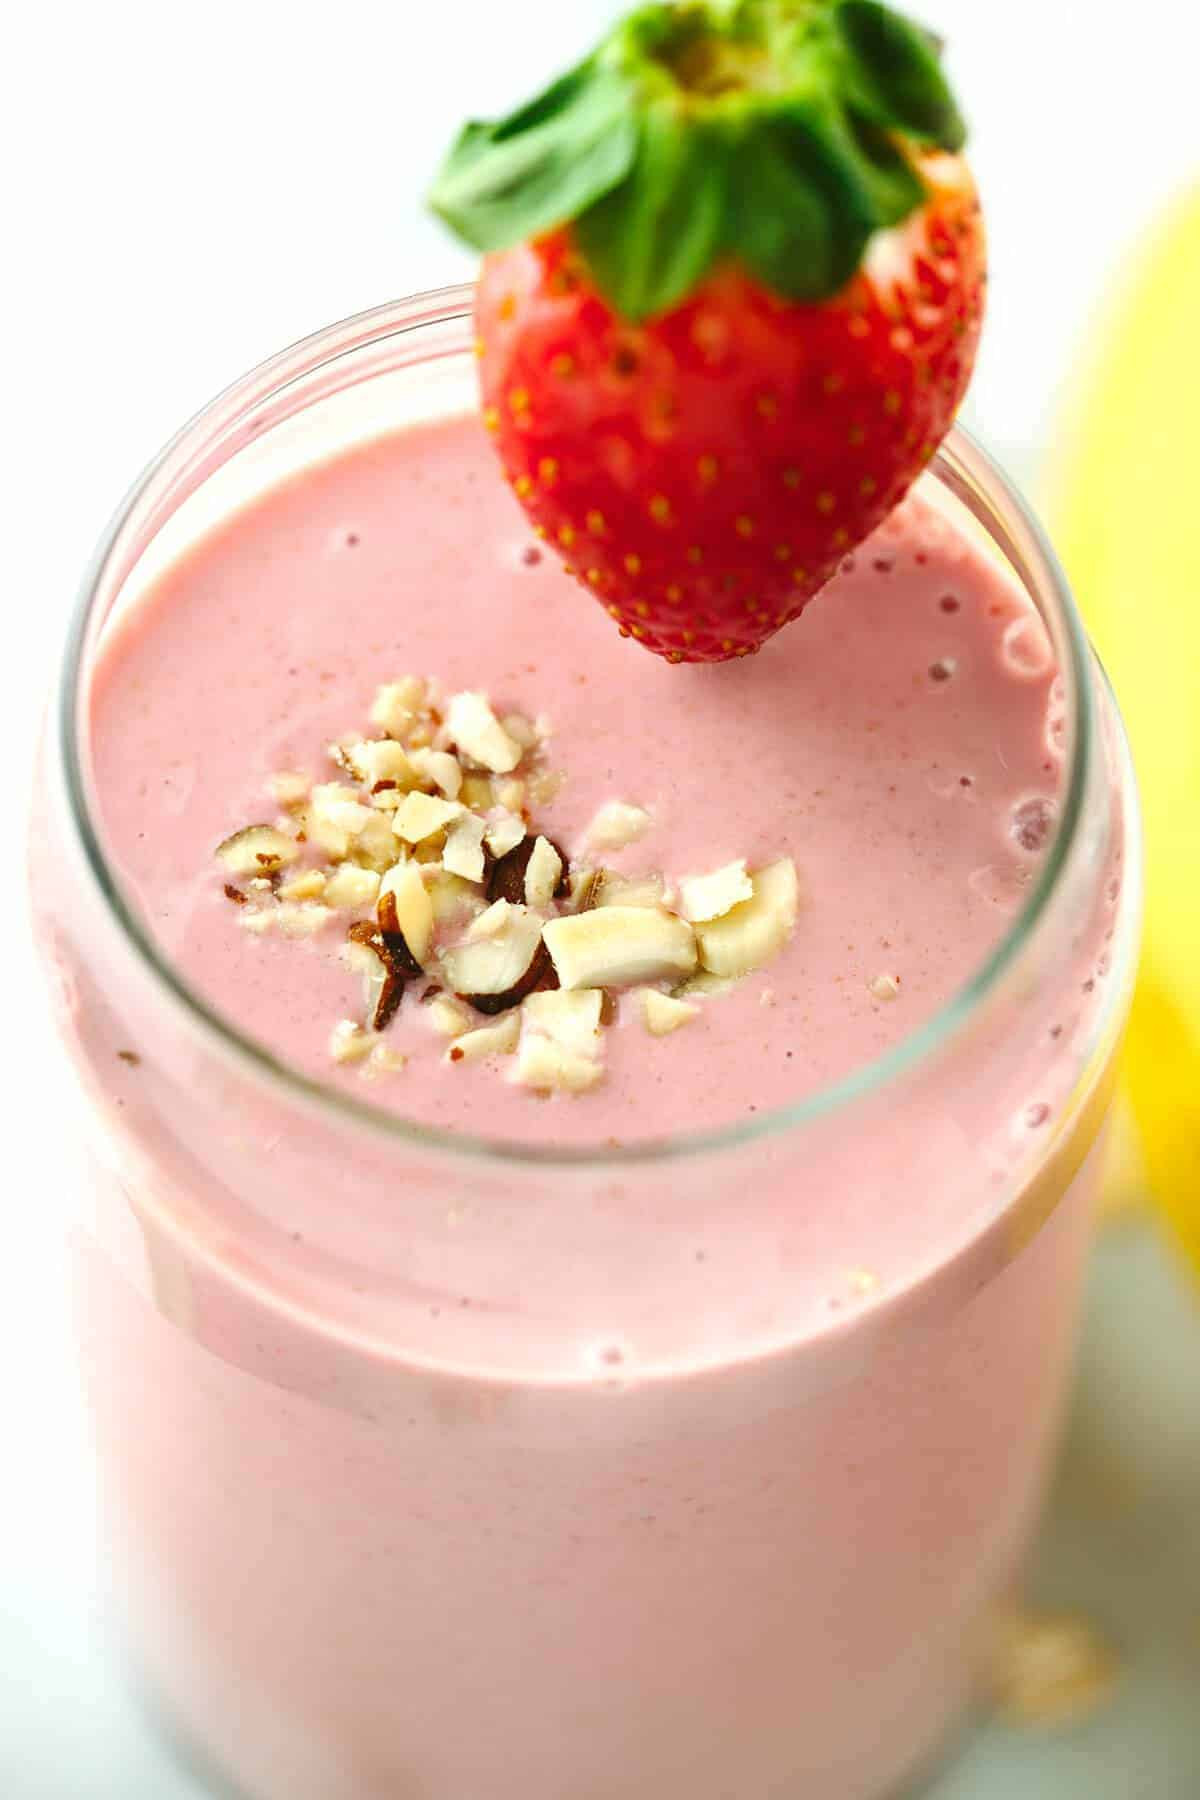 Healthy Smoothies With Almond Milk
 Strawberry Banana Smoothie Recipe with Almond Milk